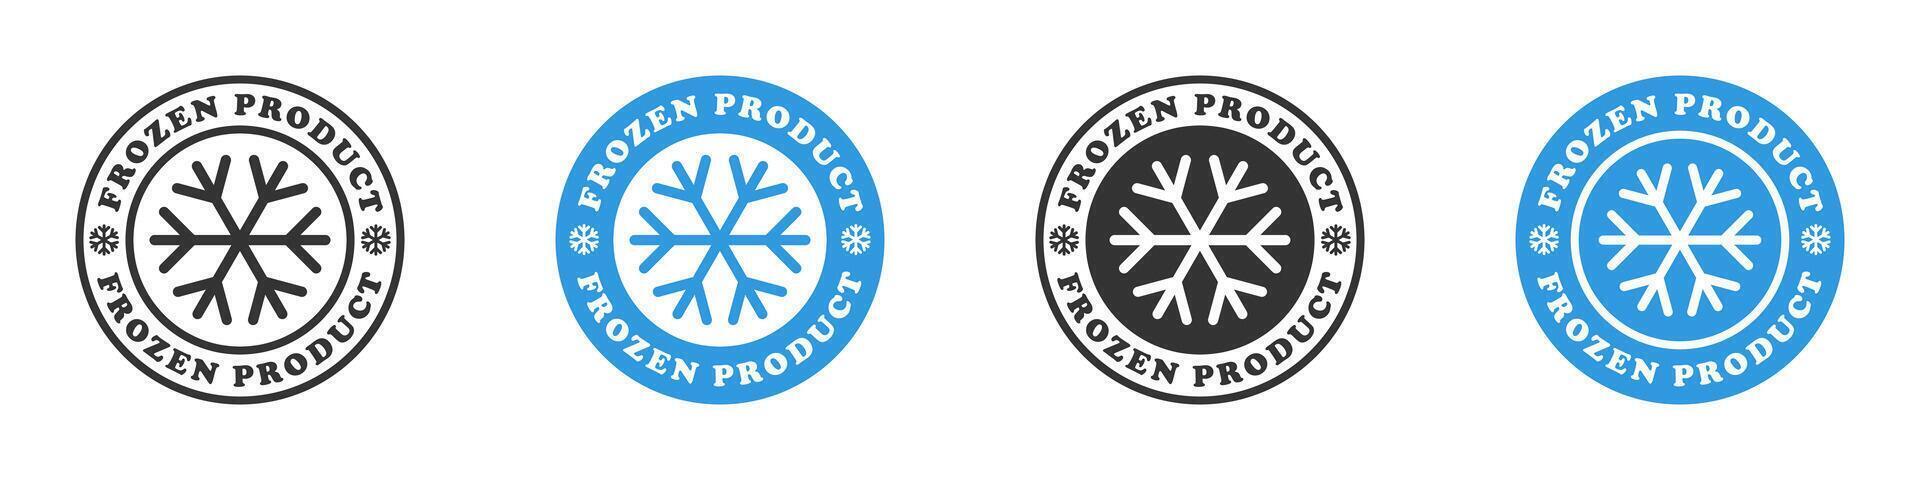 Frozen product icon. Vector illustration.